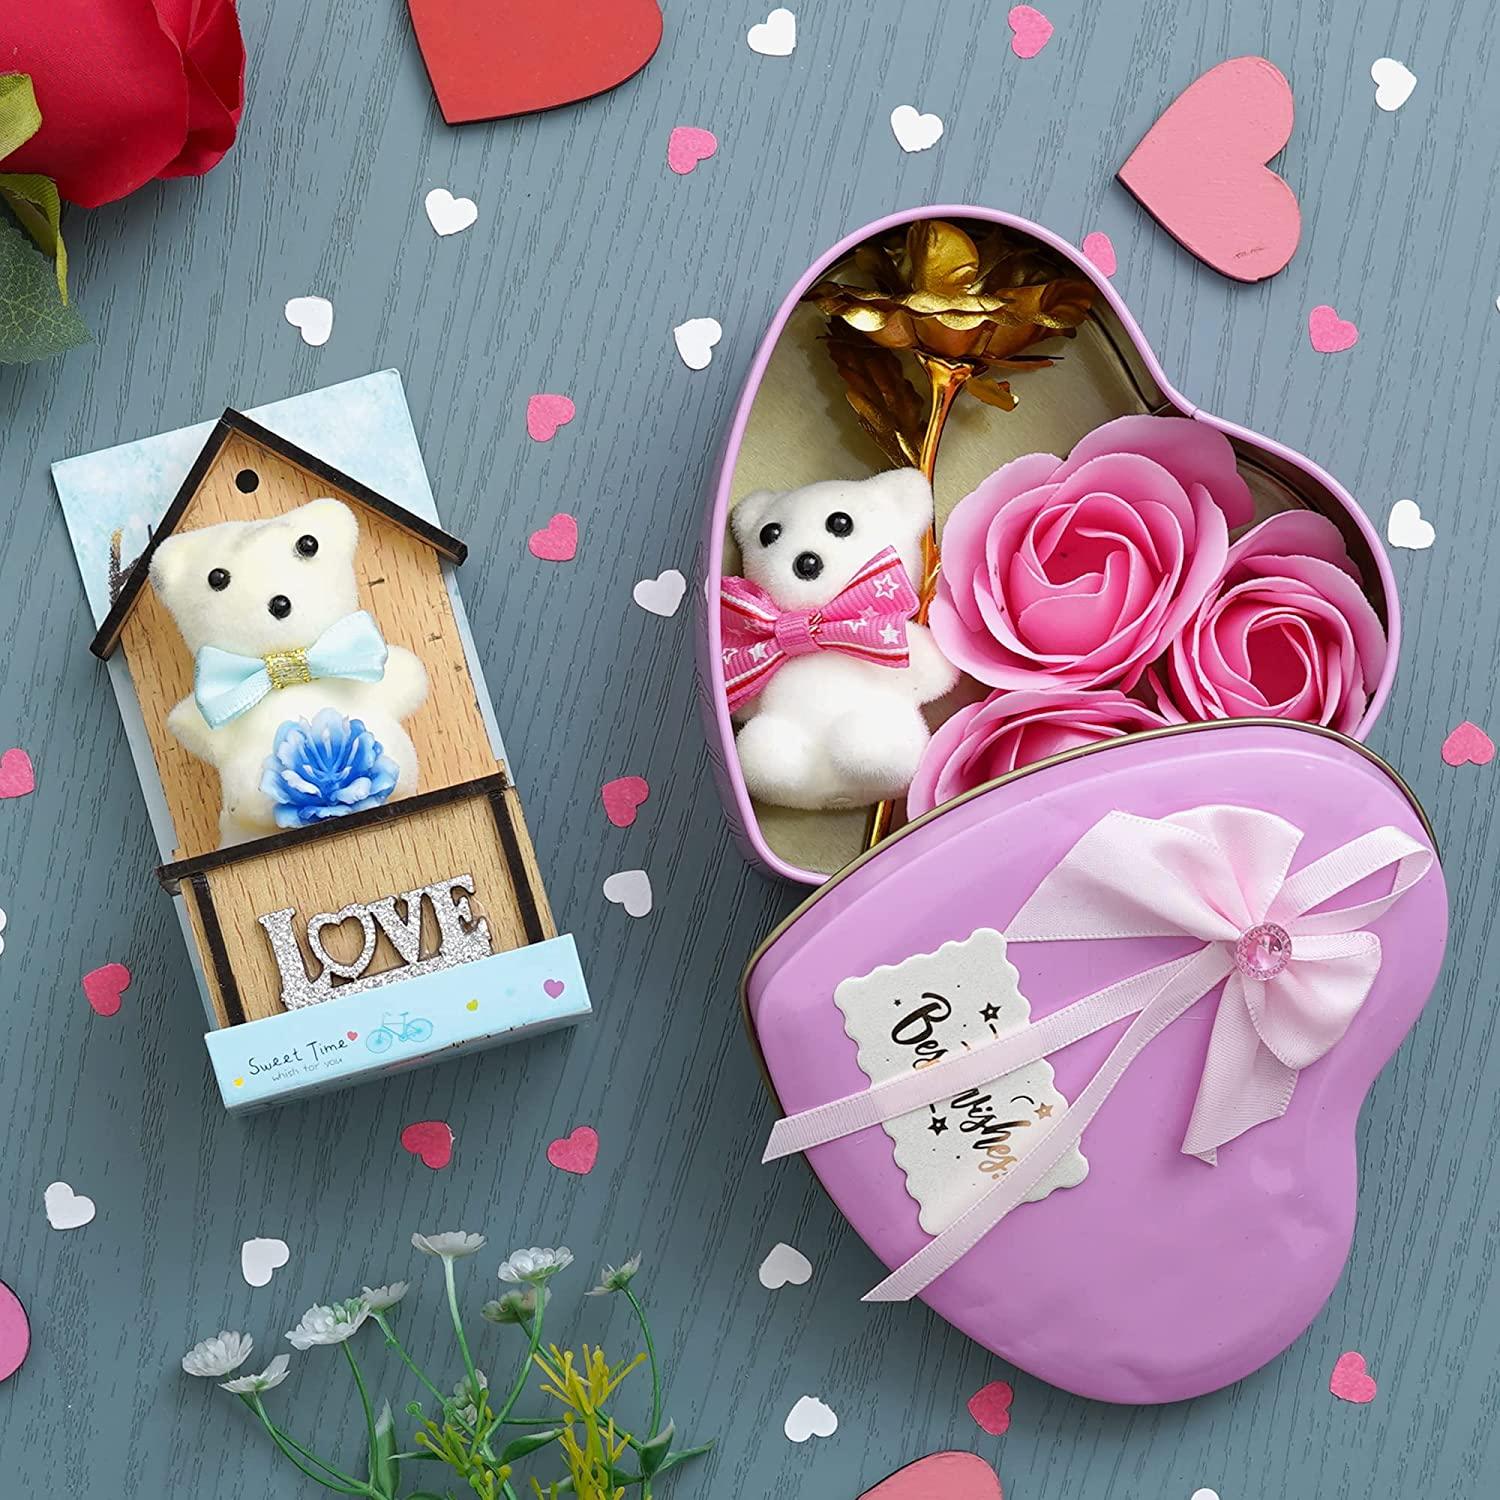 Love Messages Popup Romantic Gift Box couple gift 8 x 8 x 2.5 cm